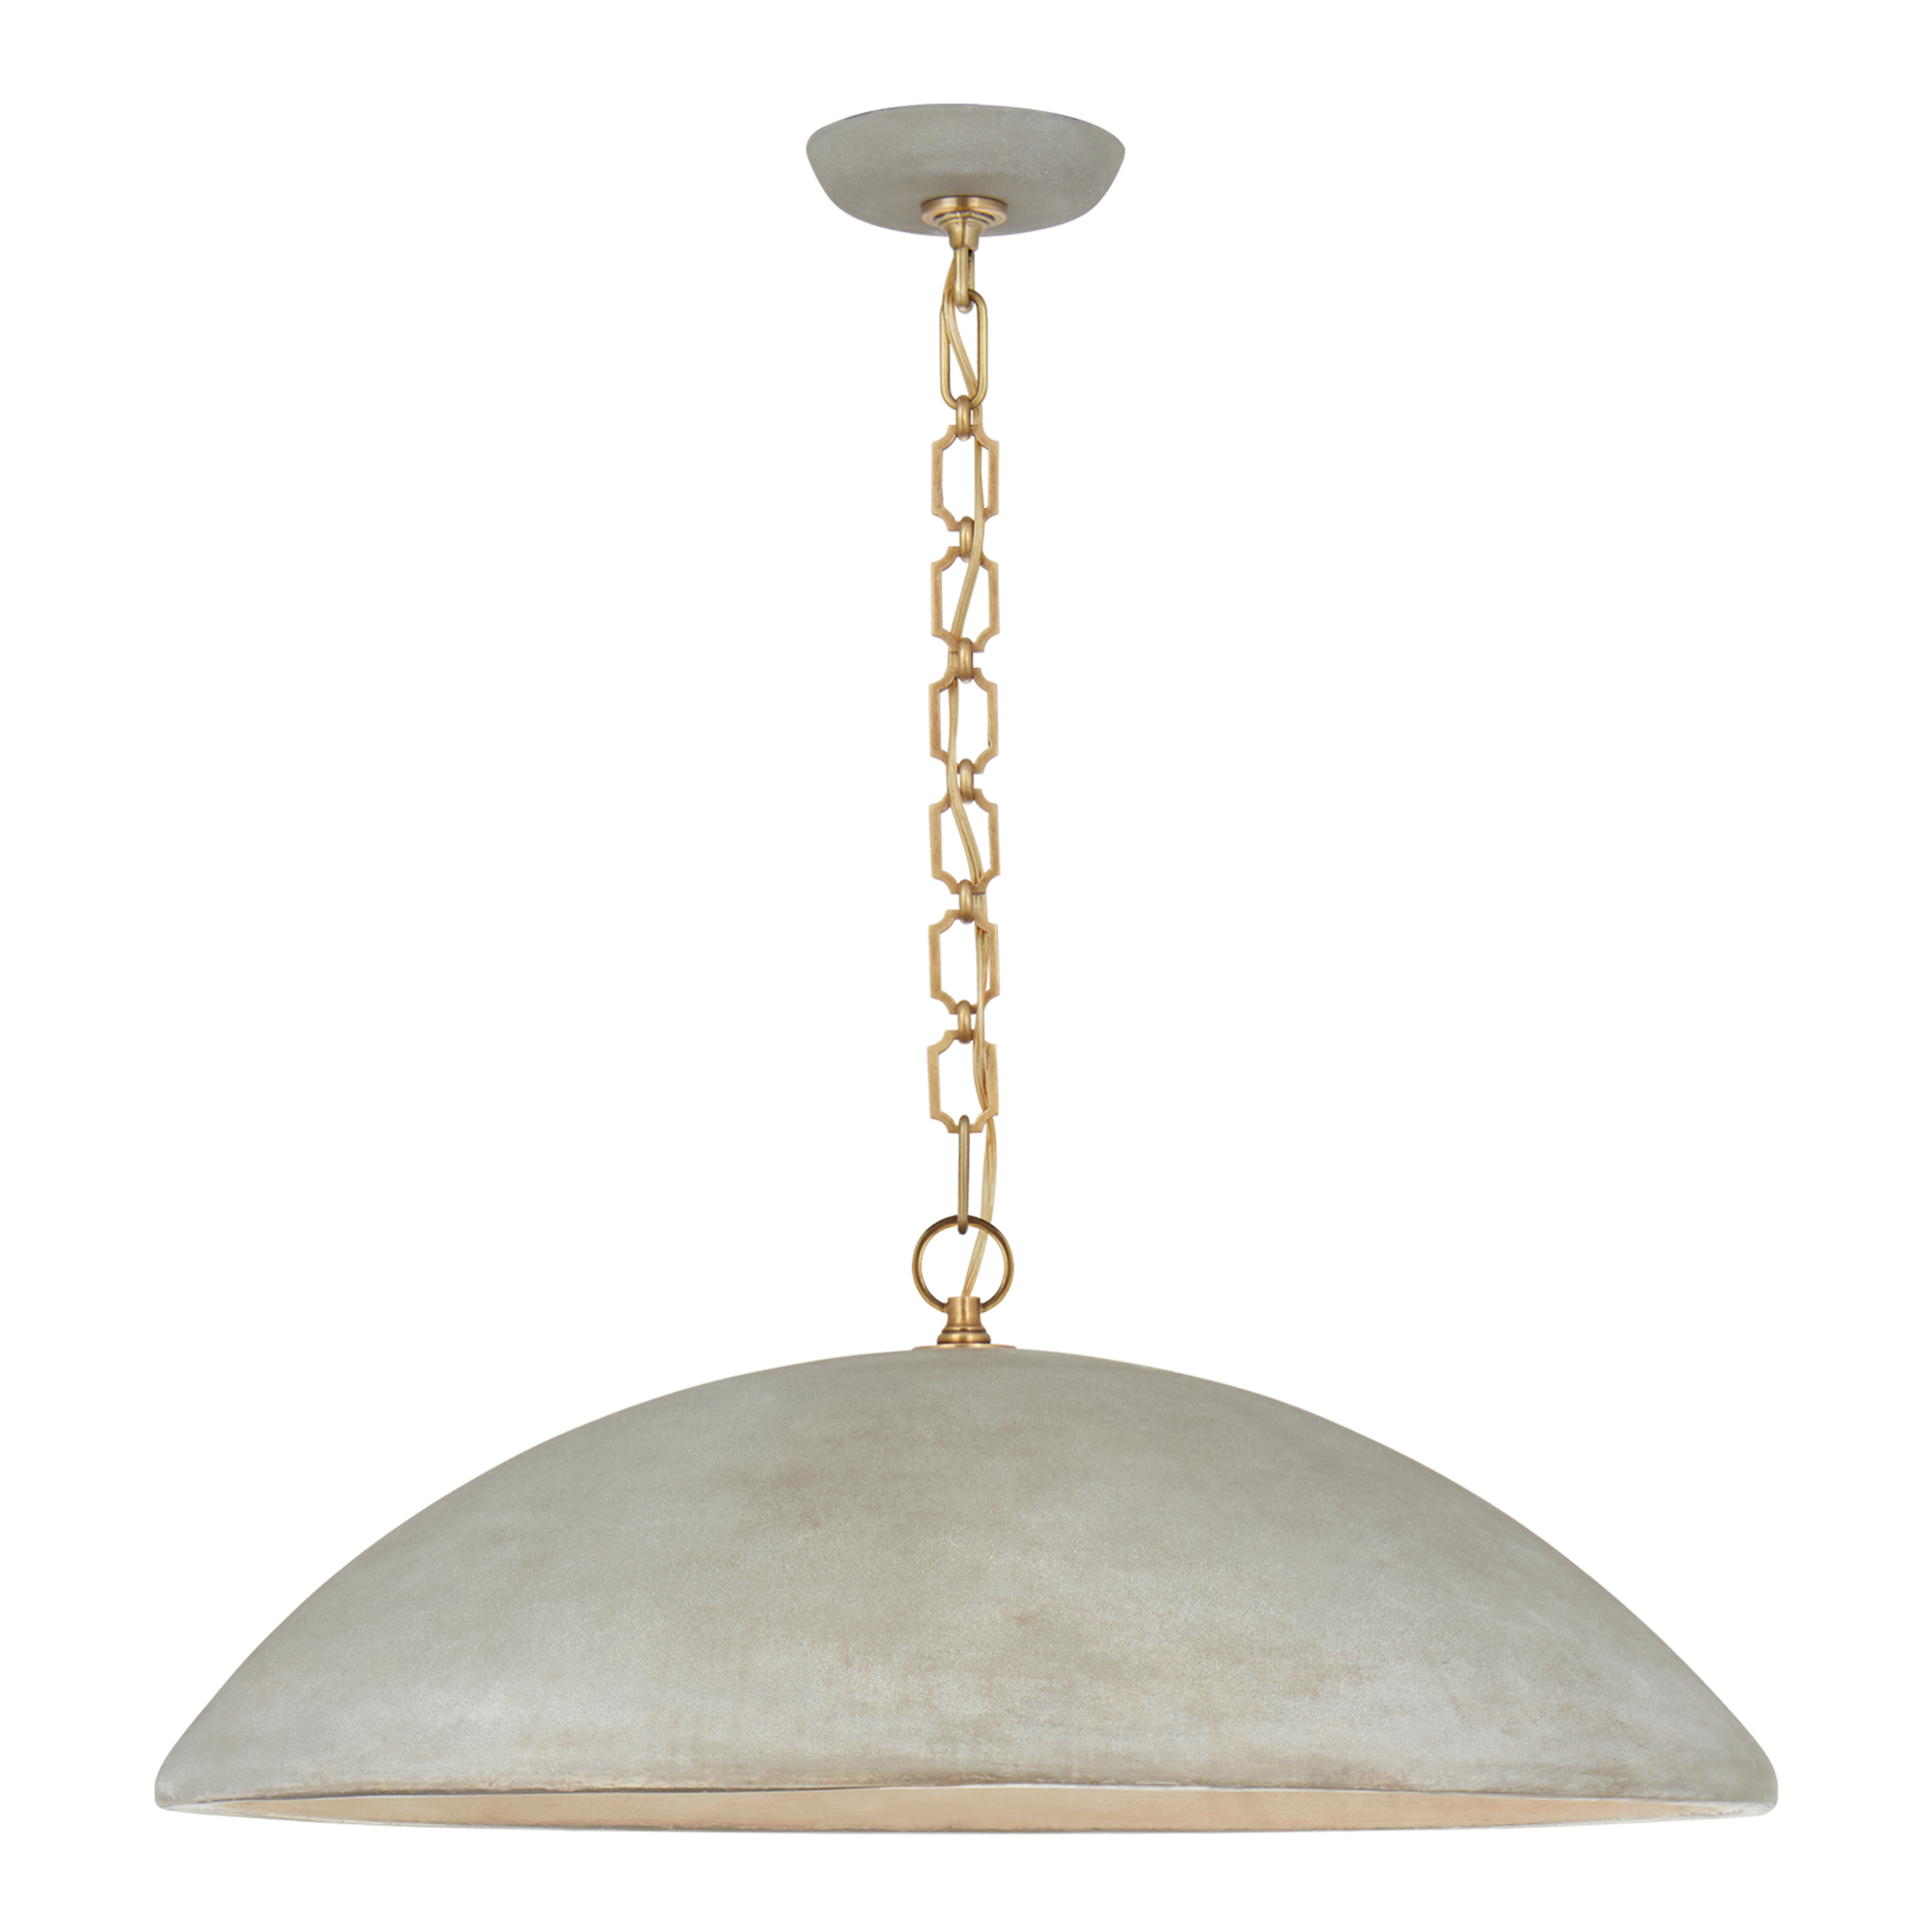 The Elliot Large Pendant Lightoffers a fresh mix of continental and classic style, emphasizing the antiques and collections that create a special setting.